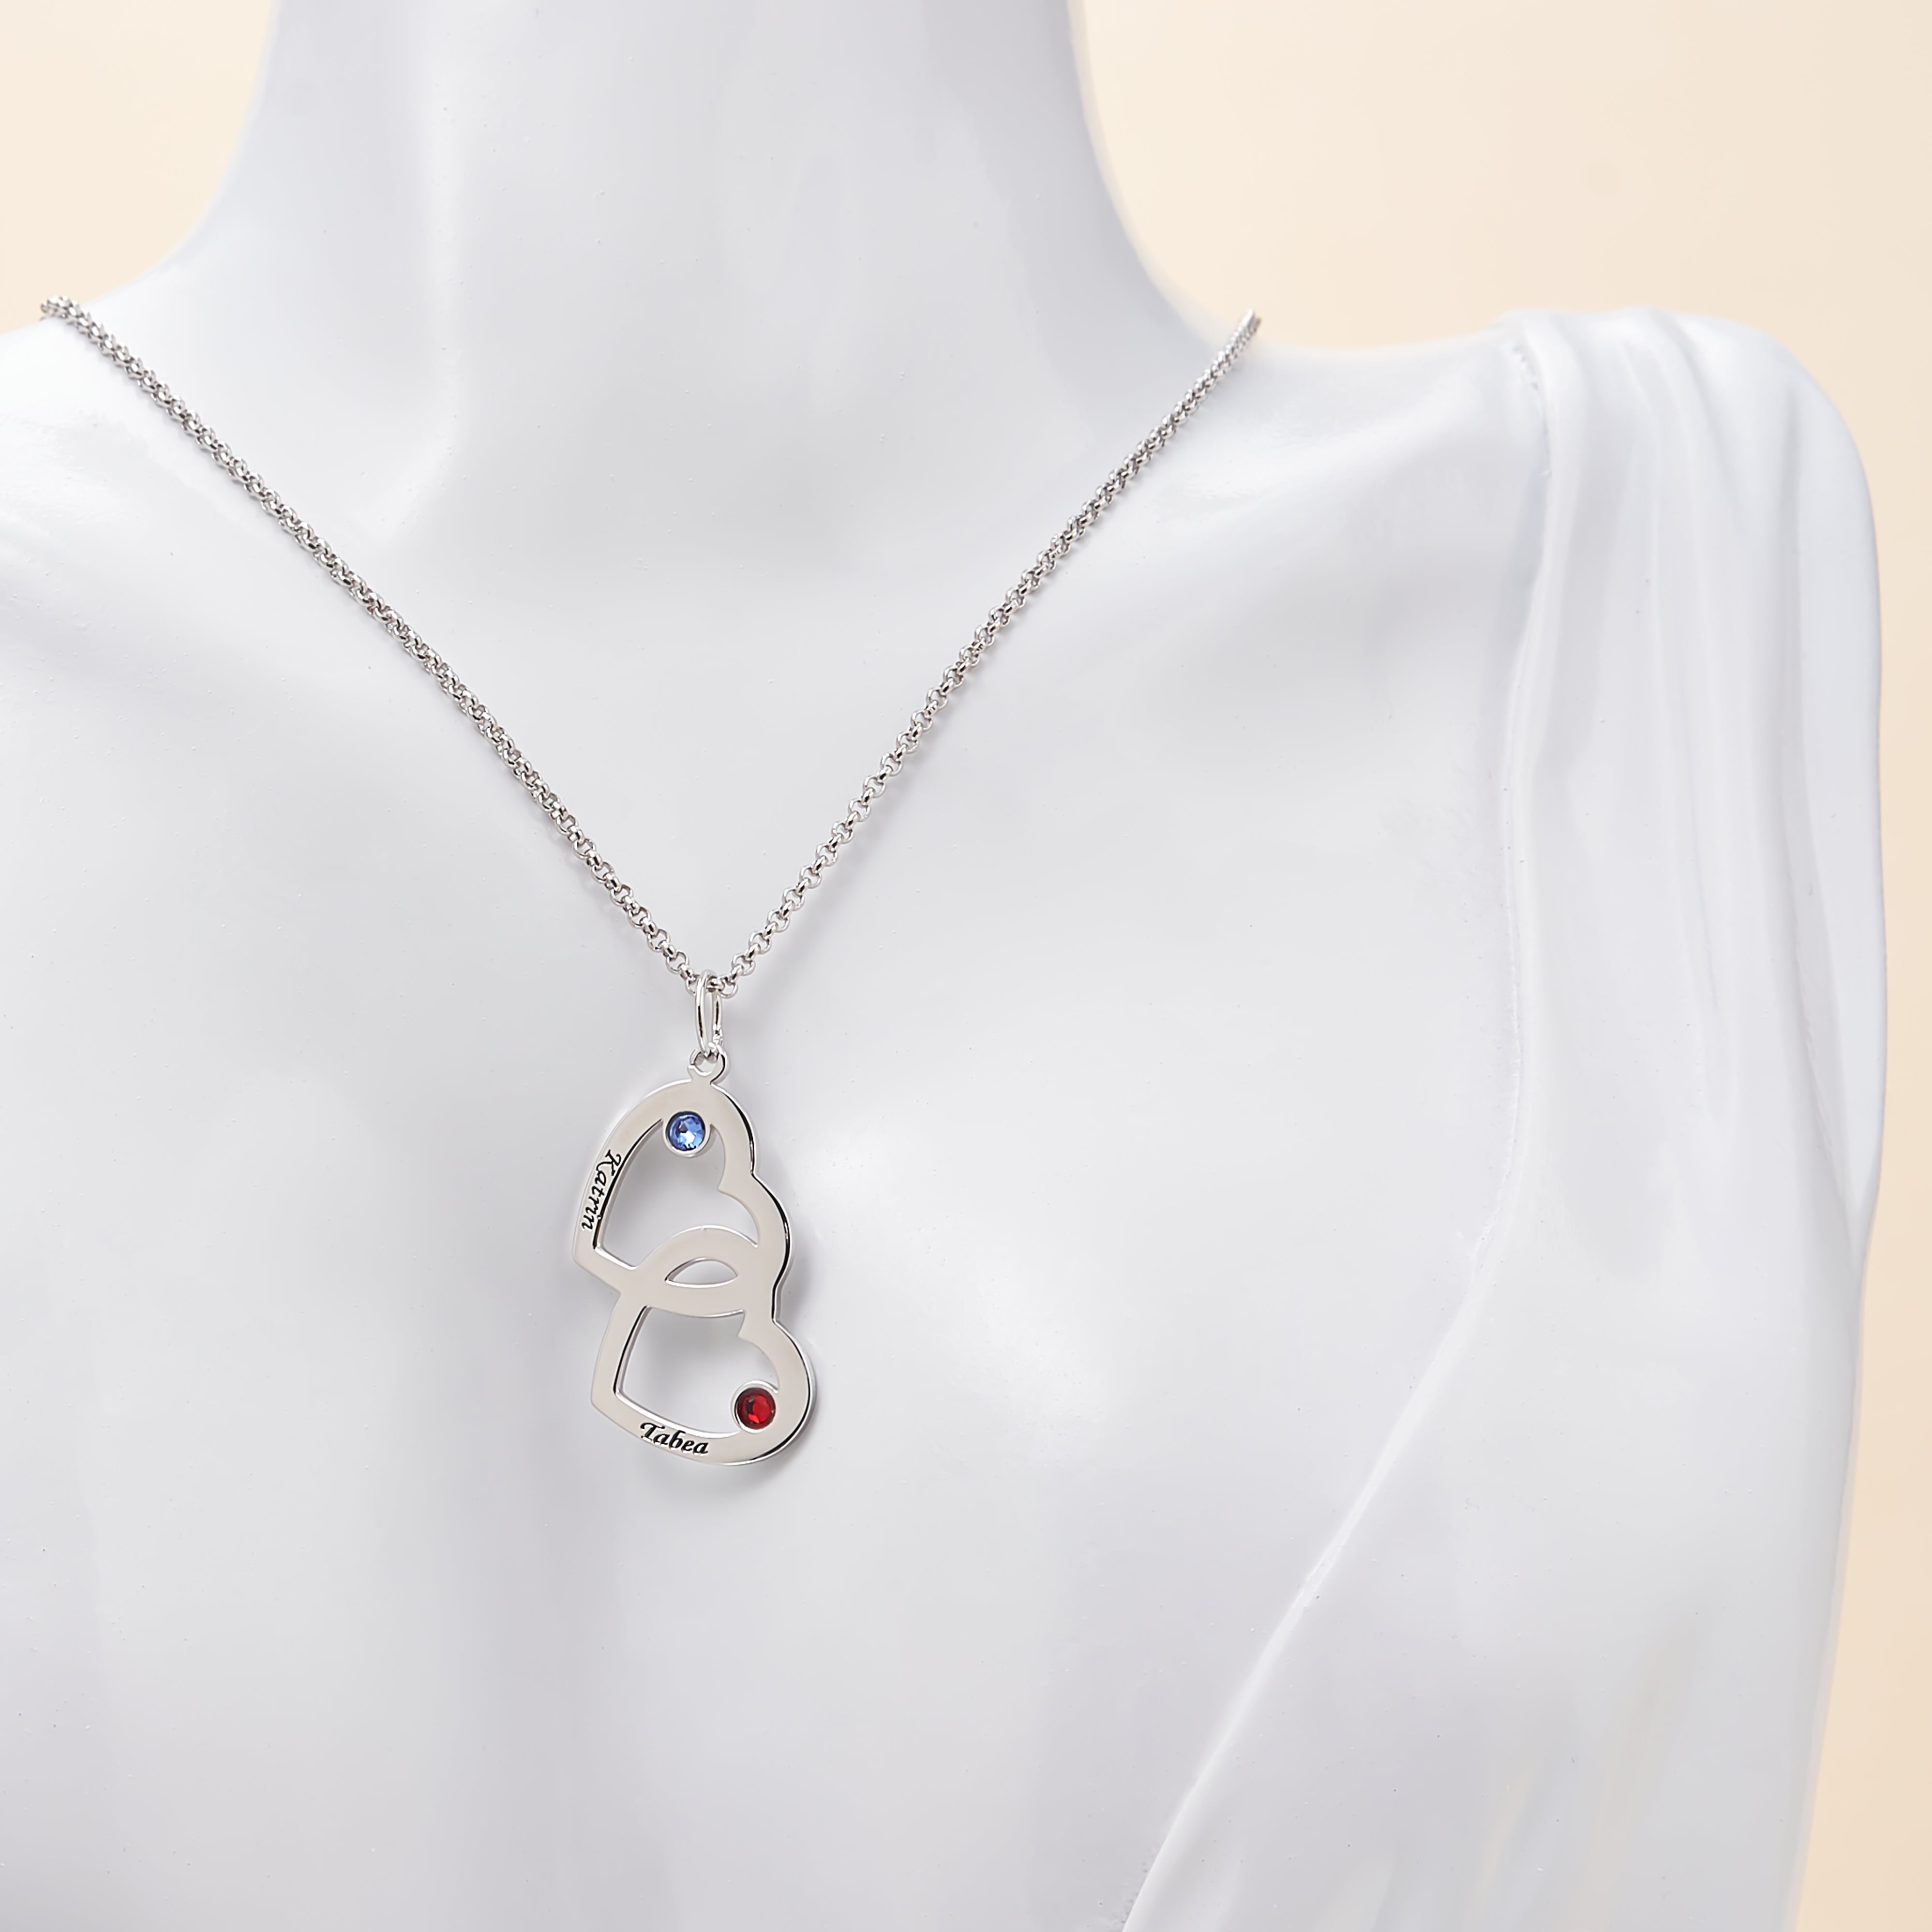 Heart-to-heart birthstone personalized name necklace